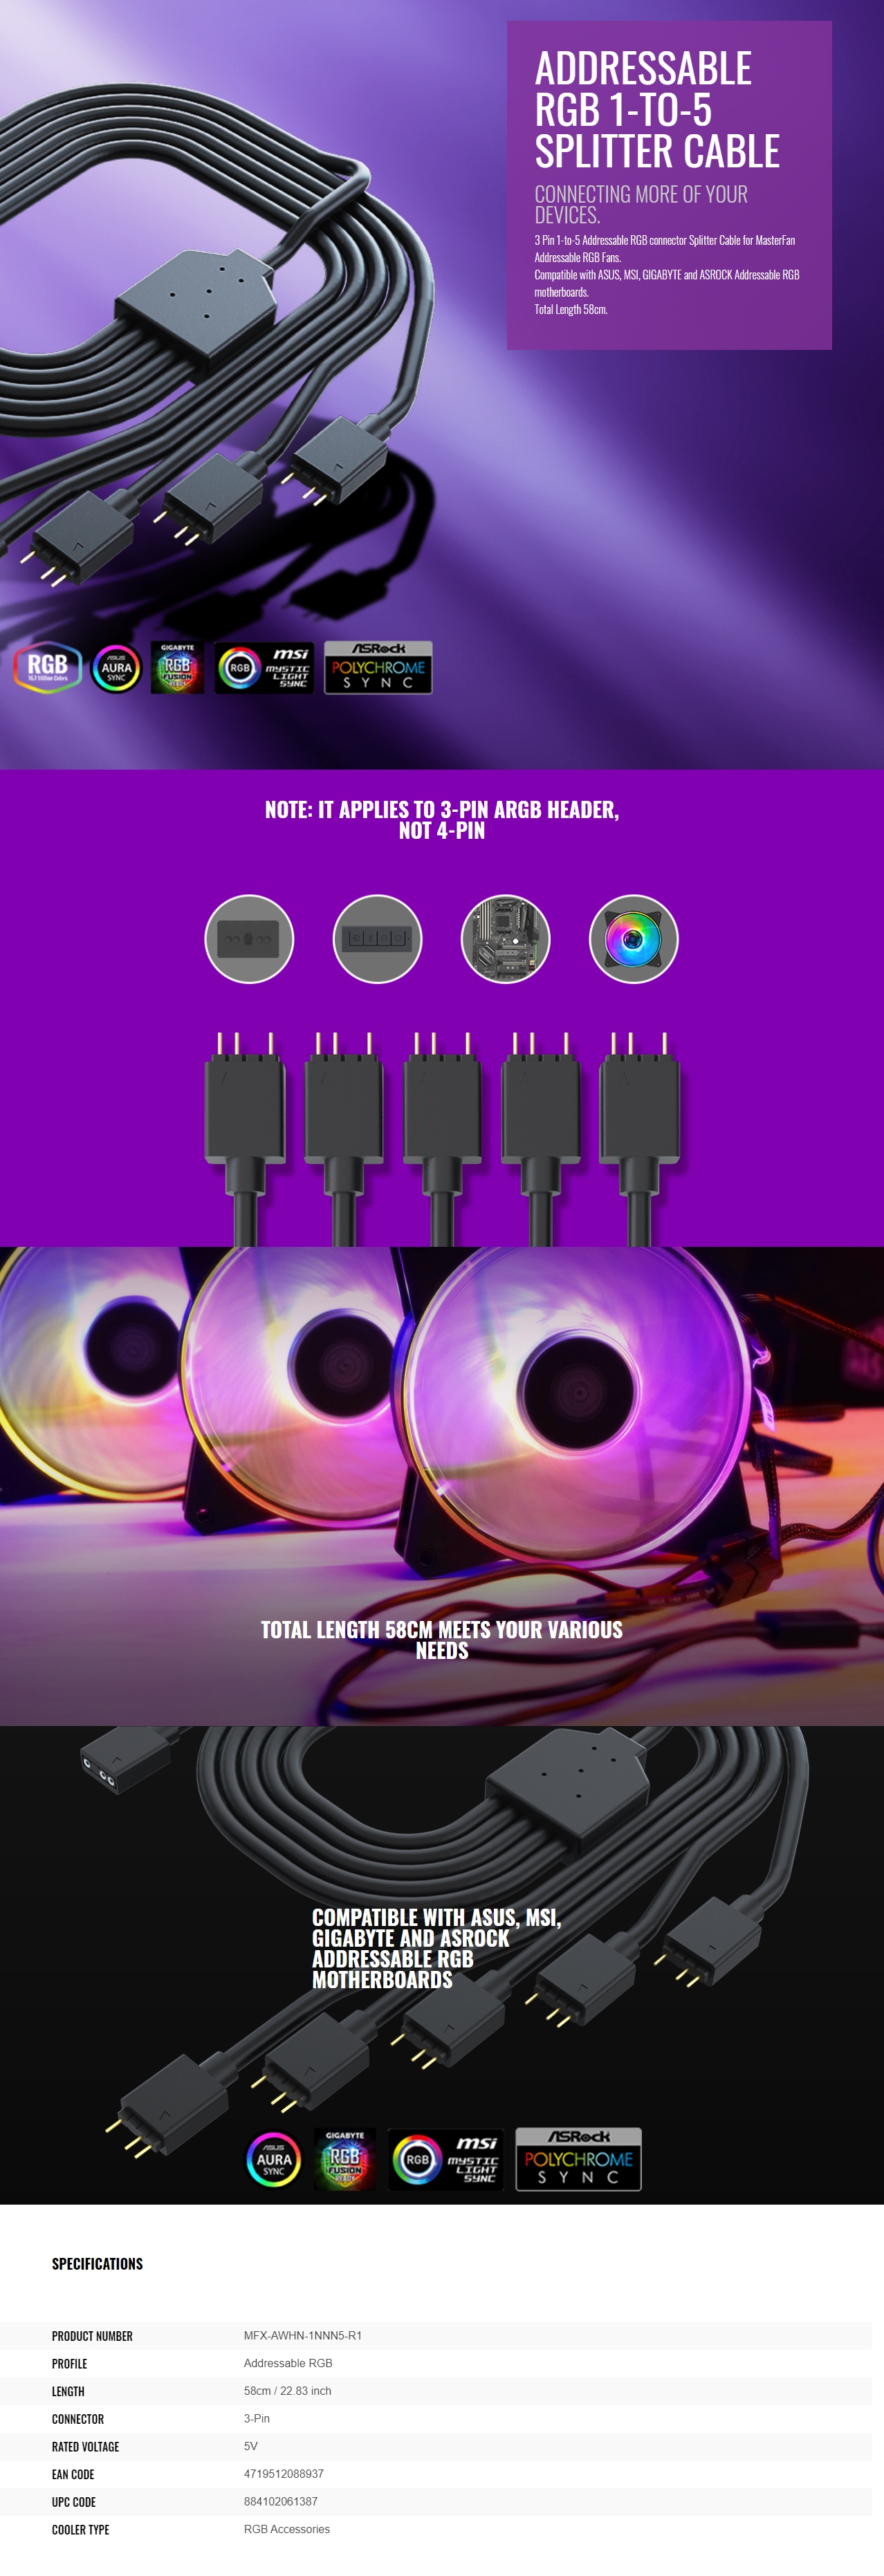 A large marketing image providing additional information about the product Cooler Master Addressable RGB Trident Fan Cable 1 to 5 - Additional alt info not provided